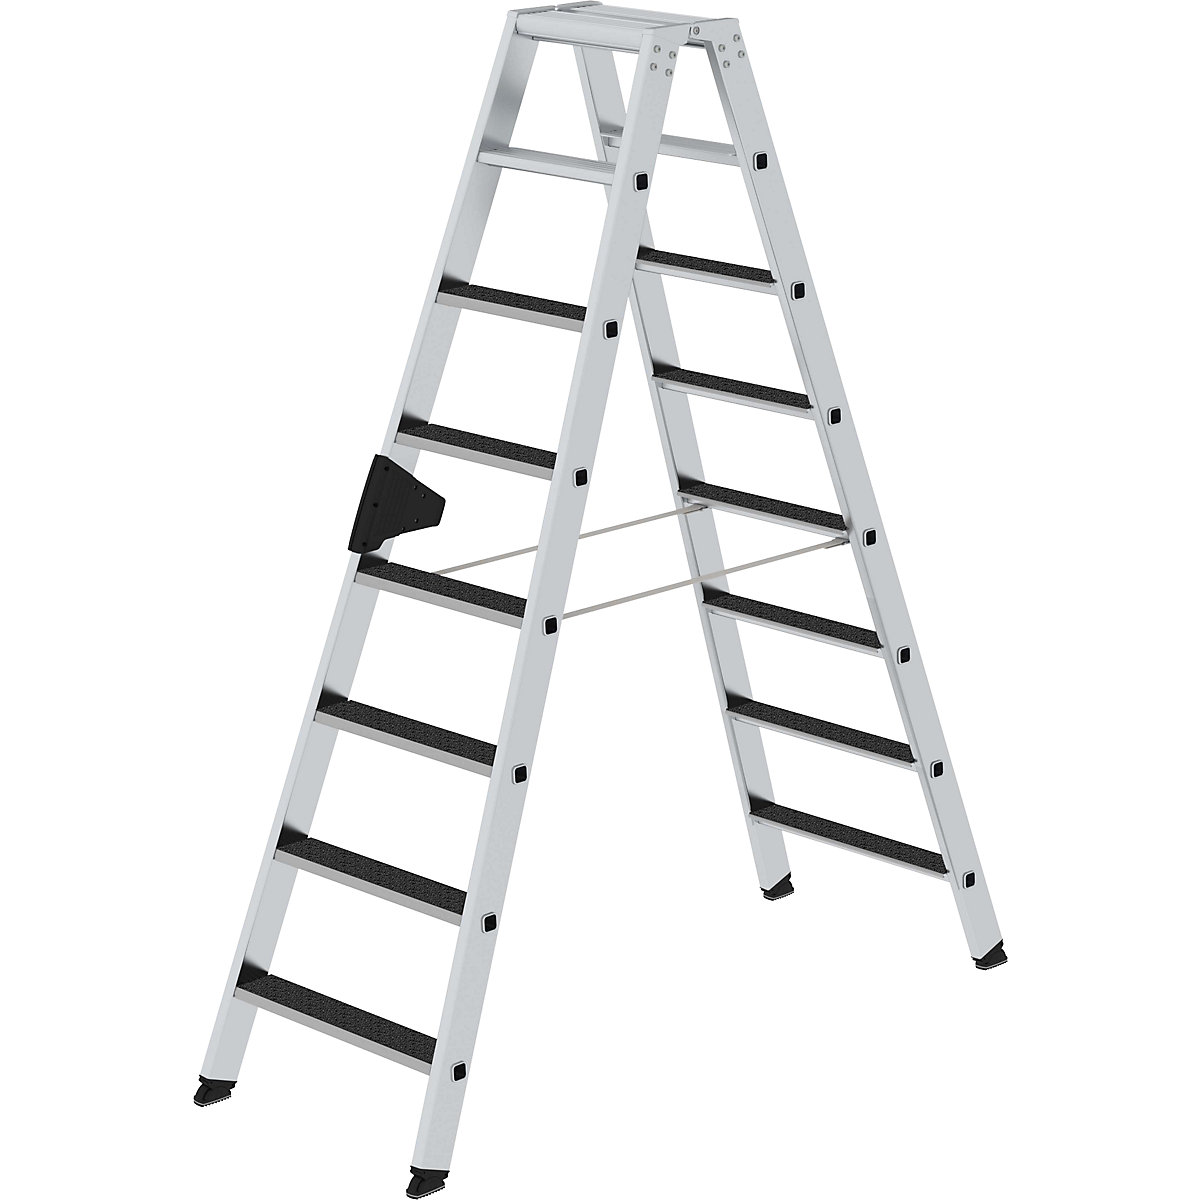 CLIP-STEP step ladder – MUNK, double sided access, slip resistant R13, 2 x 8 steps-12